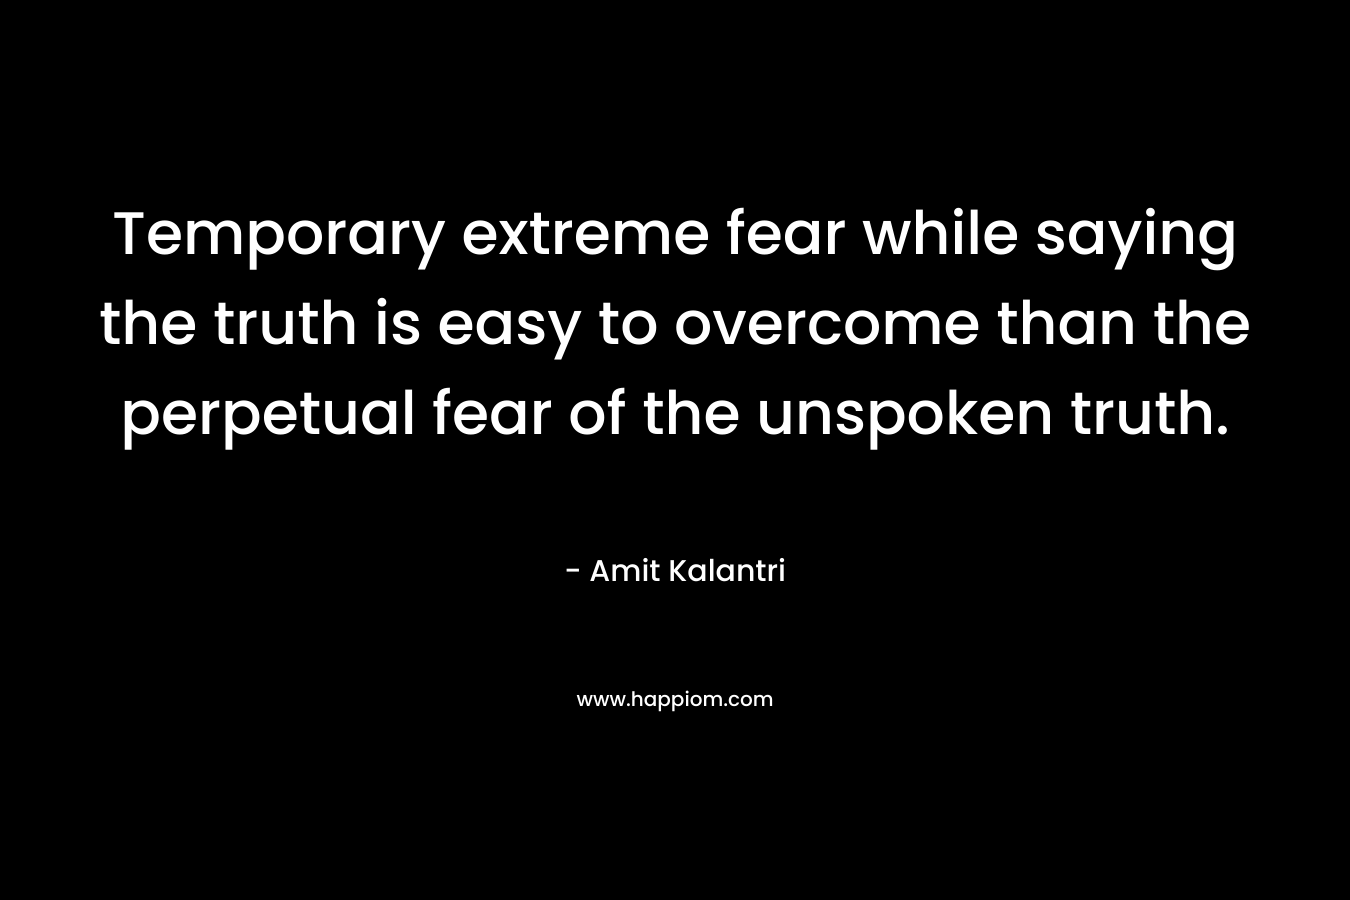 Temporary extreme fear while saying the truth is easy to overcome than the perpetual fear of the unspoken truth.